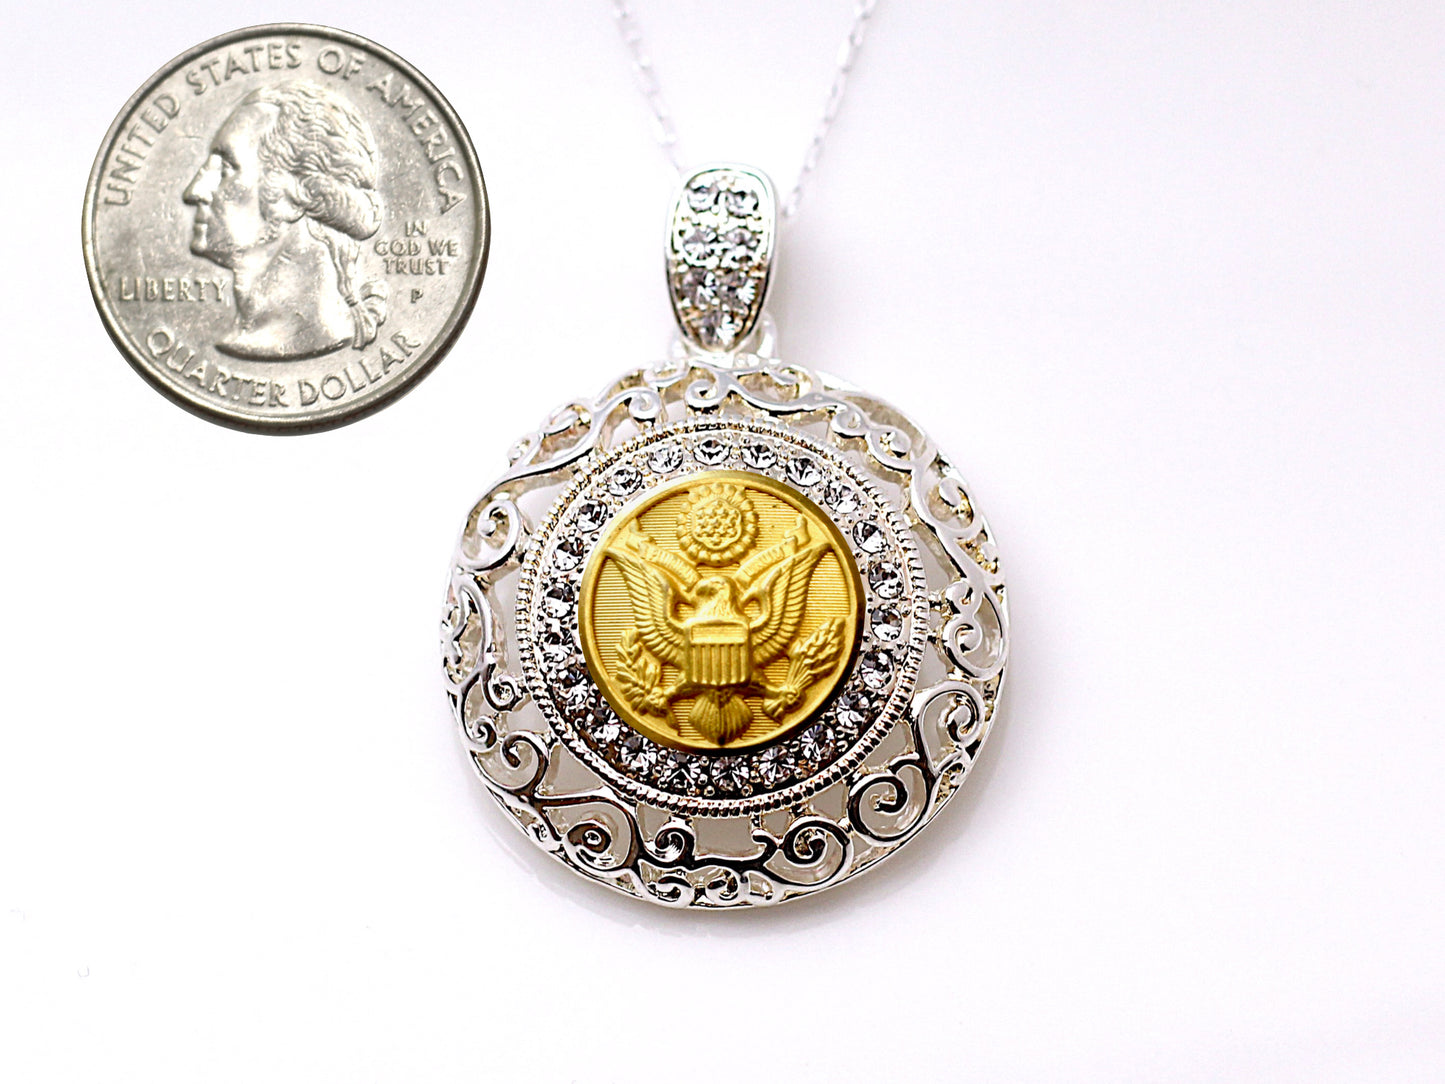 Army Button Necklace - Large Silver Rhinestone Pendant